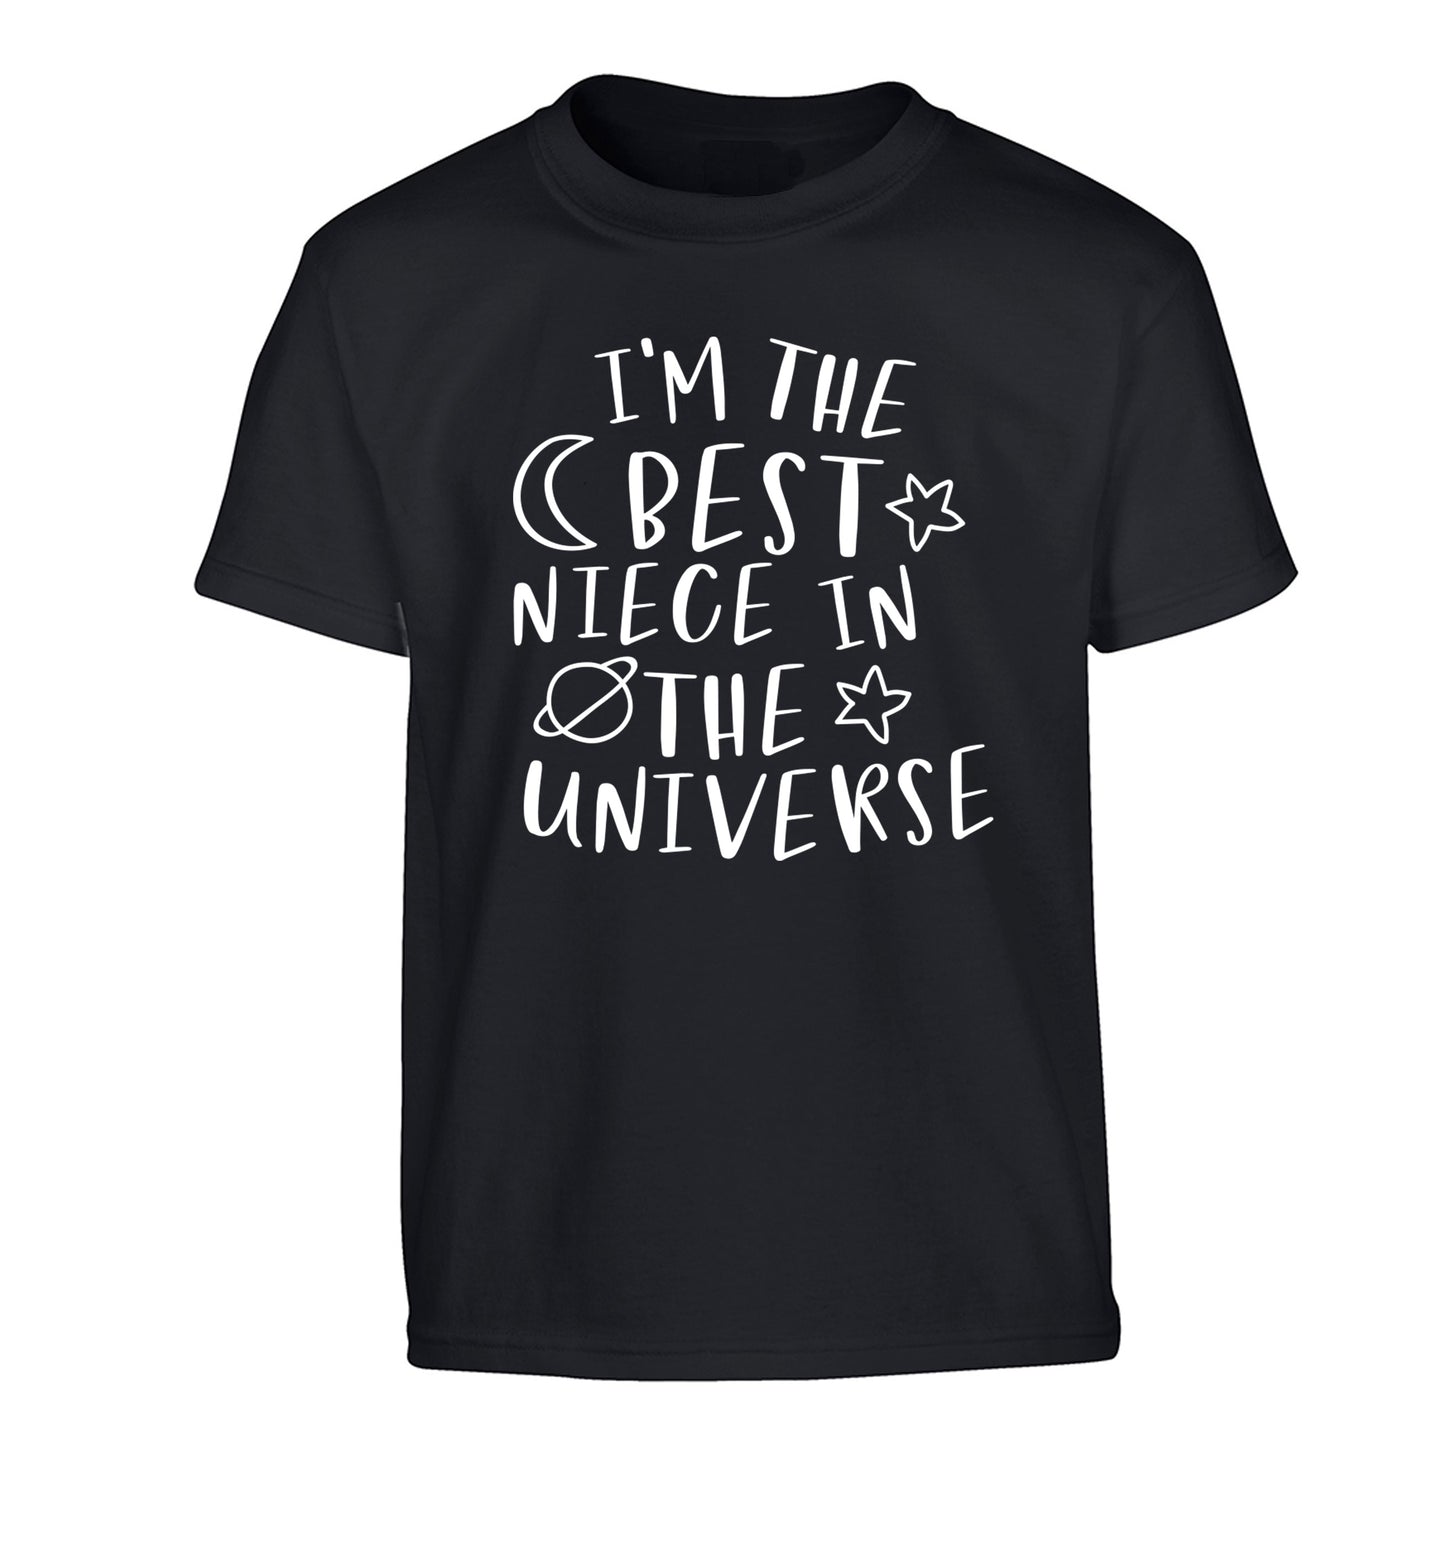 I'm the best niece in the universe Children's black Tshirt 12-13 Years